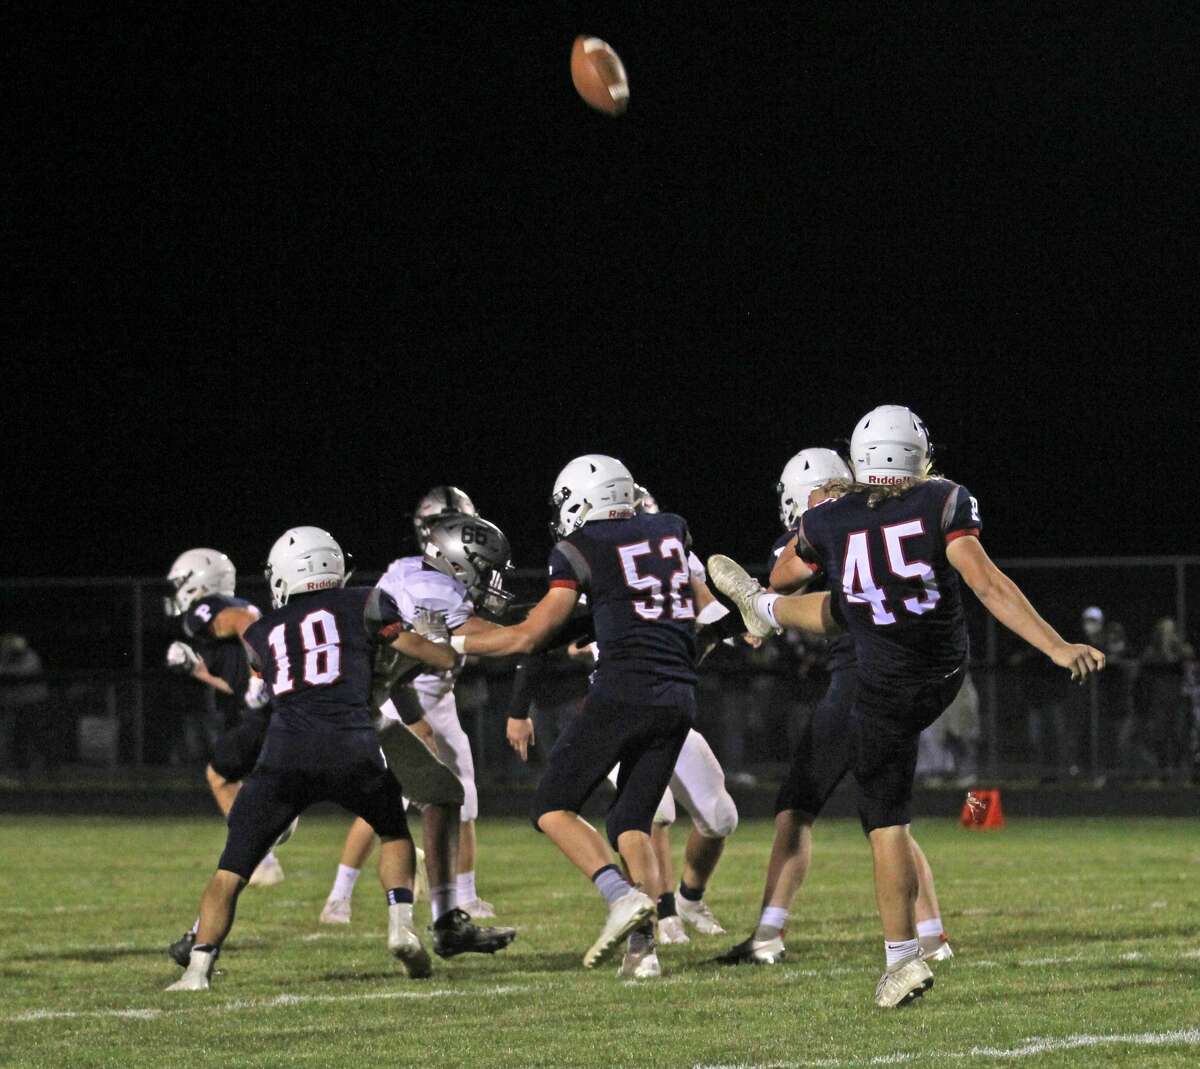 The Cass City Red Hawks spoiled USA's homecoming on Friday night as the Red Hawks rallied late in the game to beat the Patriots, 28-24.